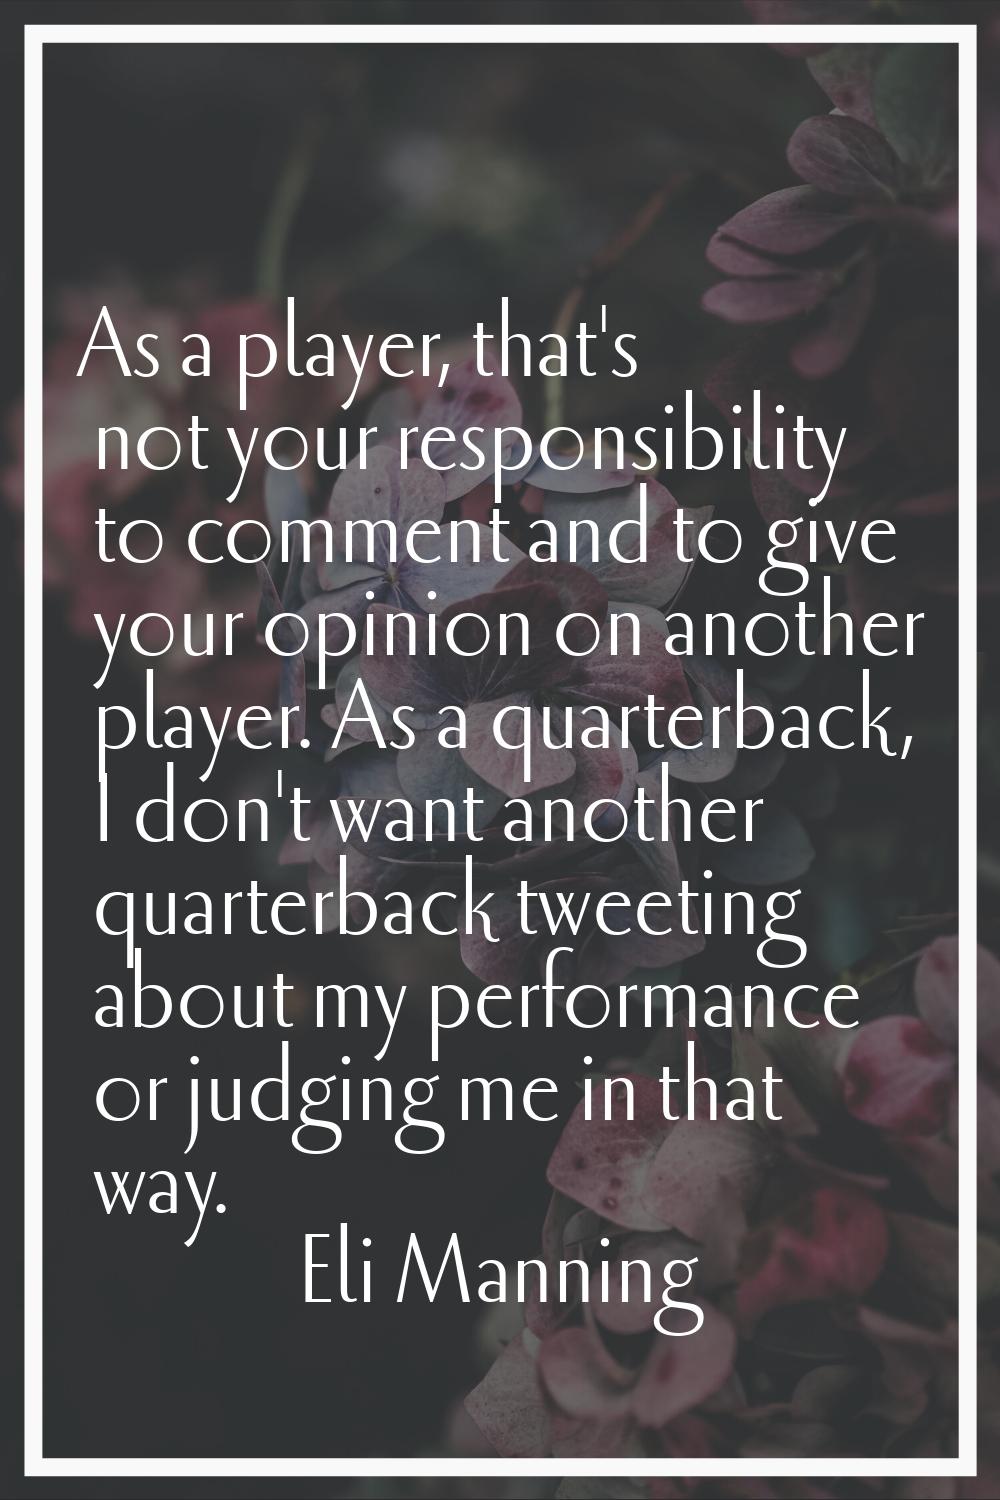 As a player, that's not your responsibility to comment and to give your opinion on another player. 